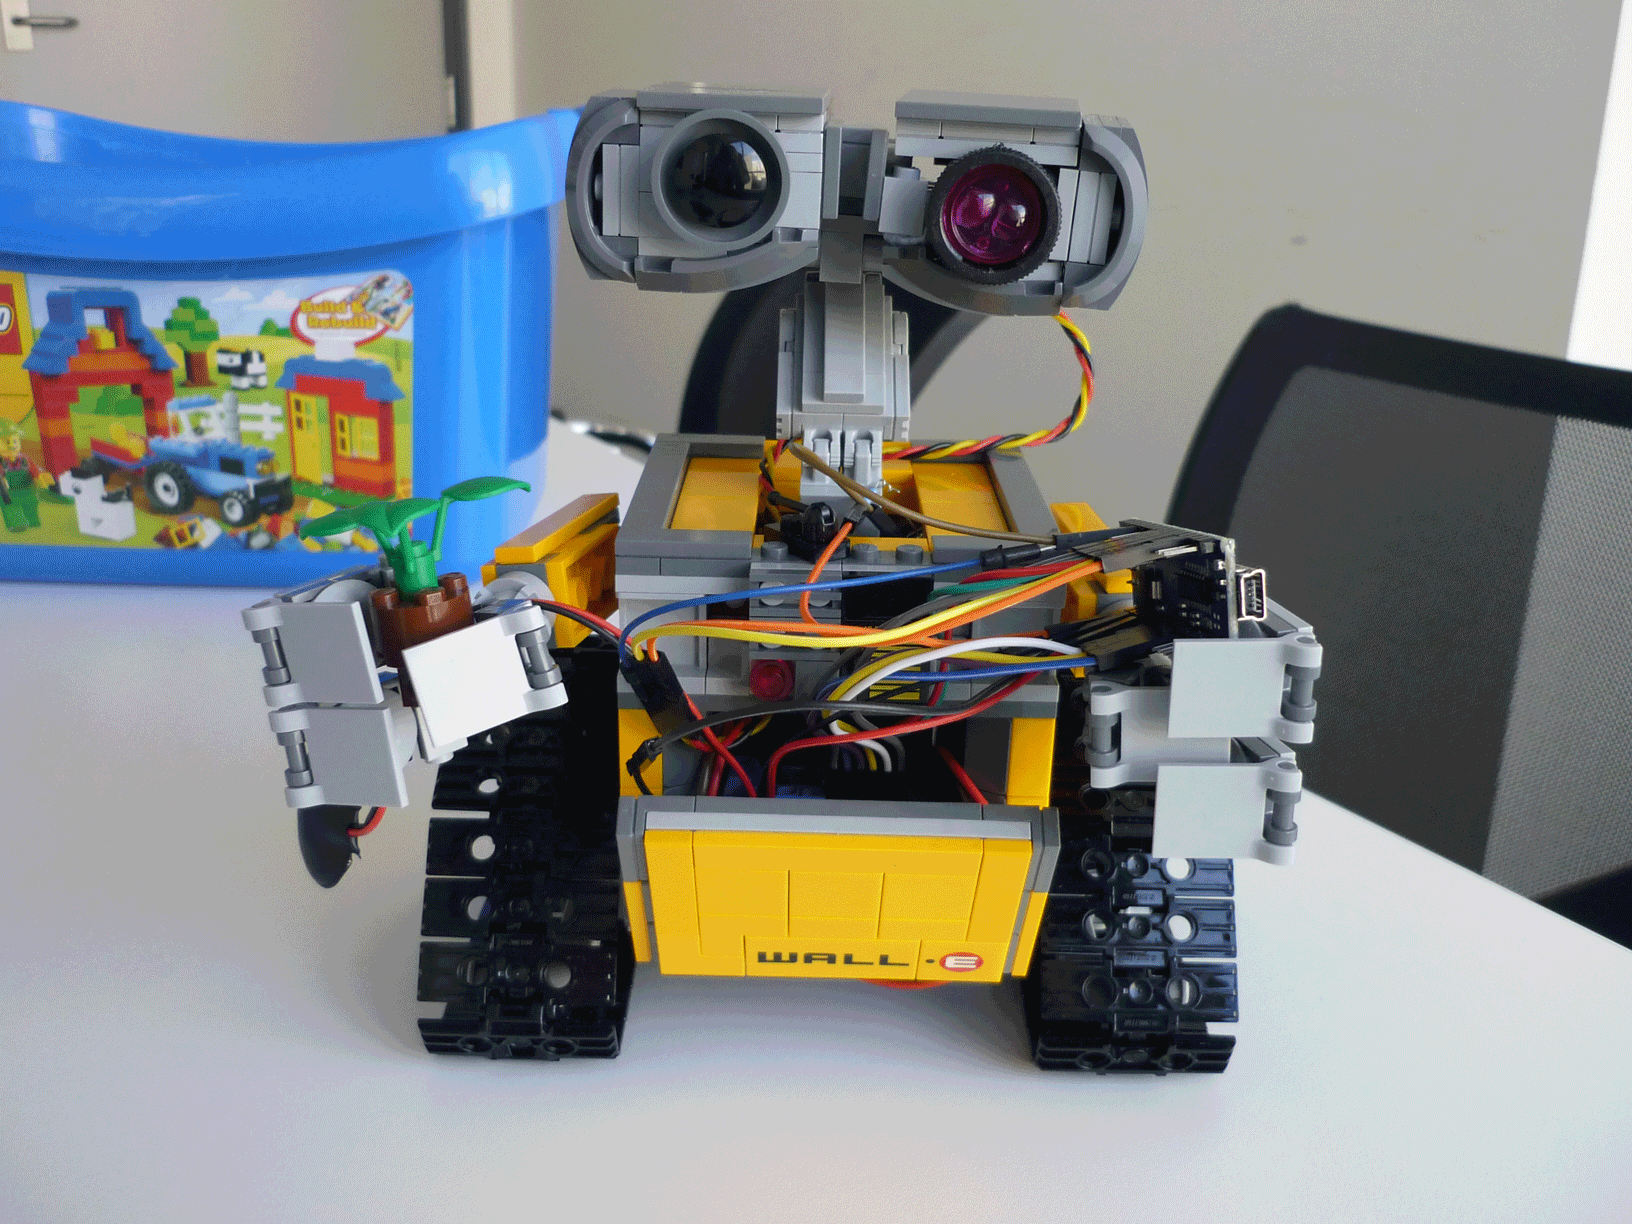 25 lego Projects - Arduino Project Hub